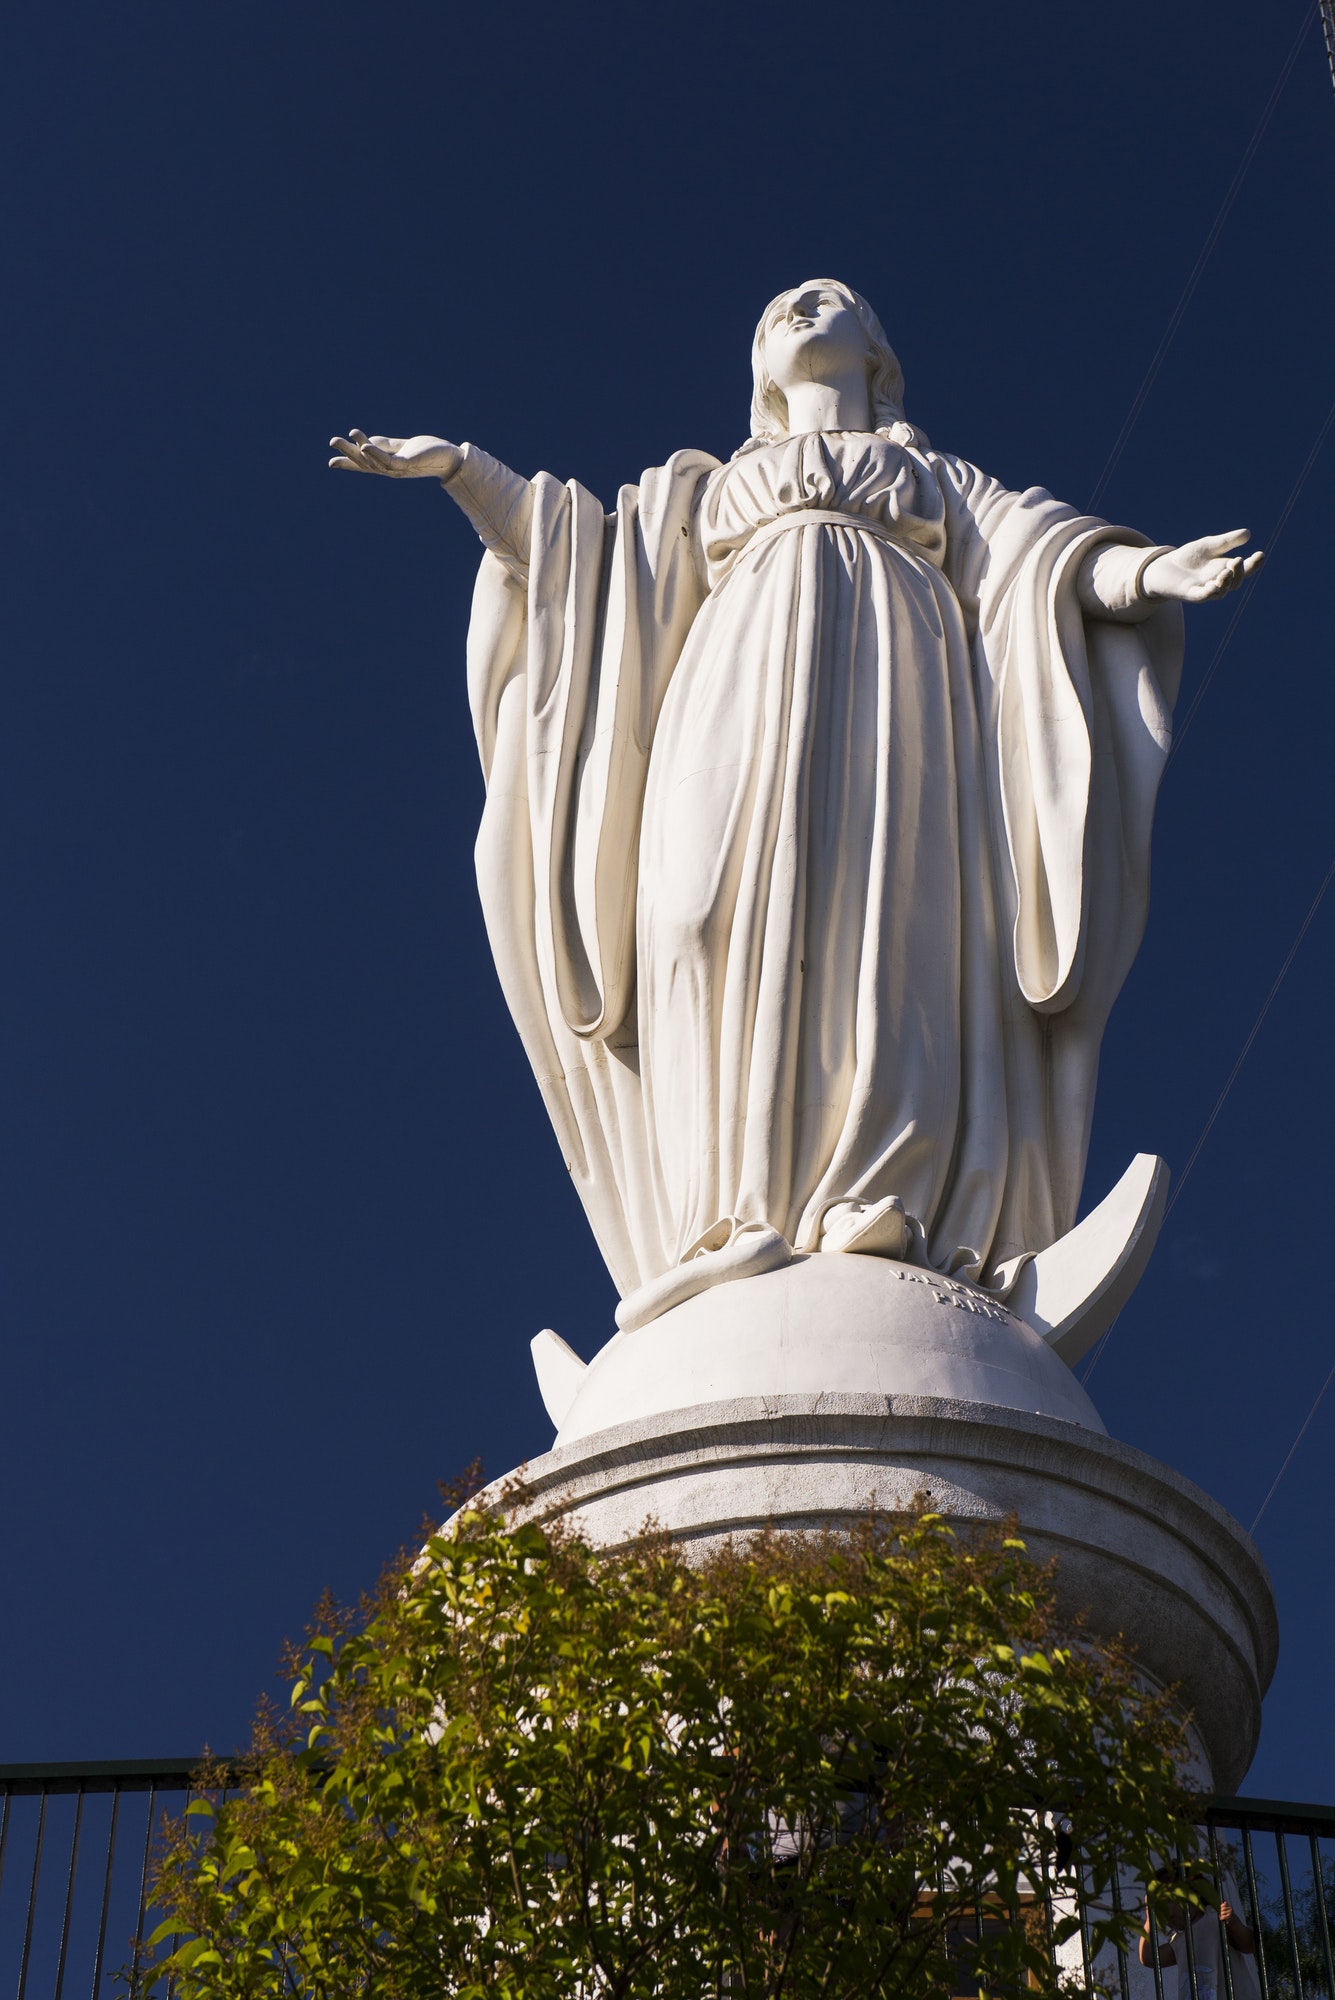 Statue of the Virgin Mary, San Cristobal Hill (Cerro San Cristobal), Barrio Bellavista (Bellavista N